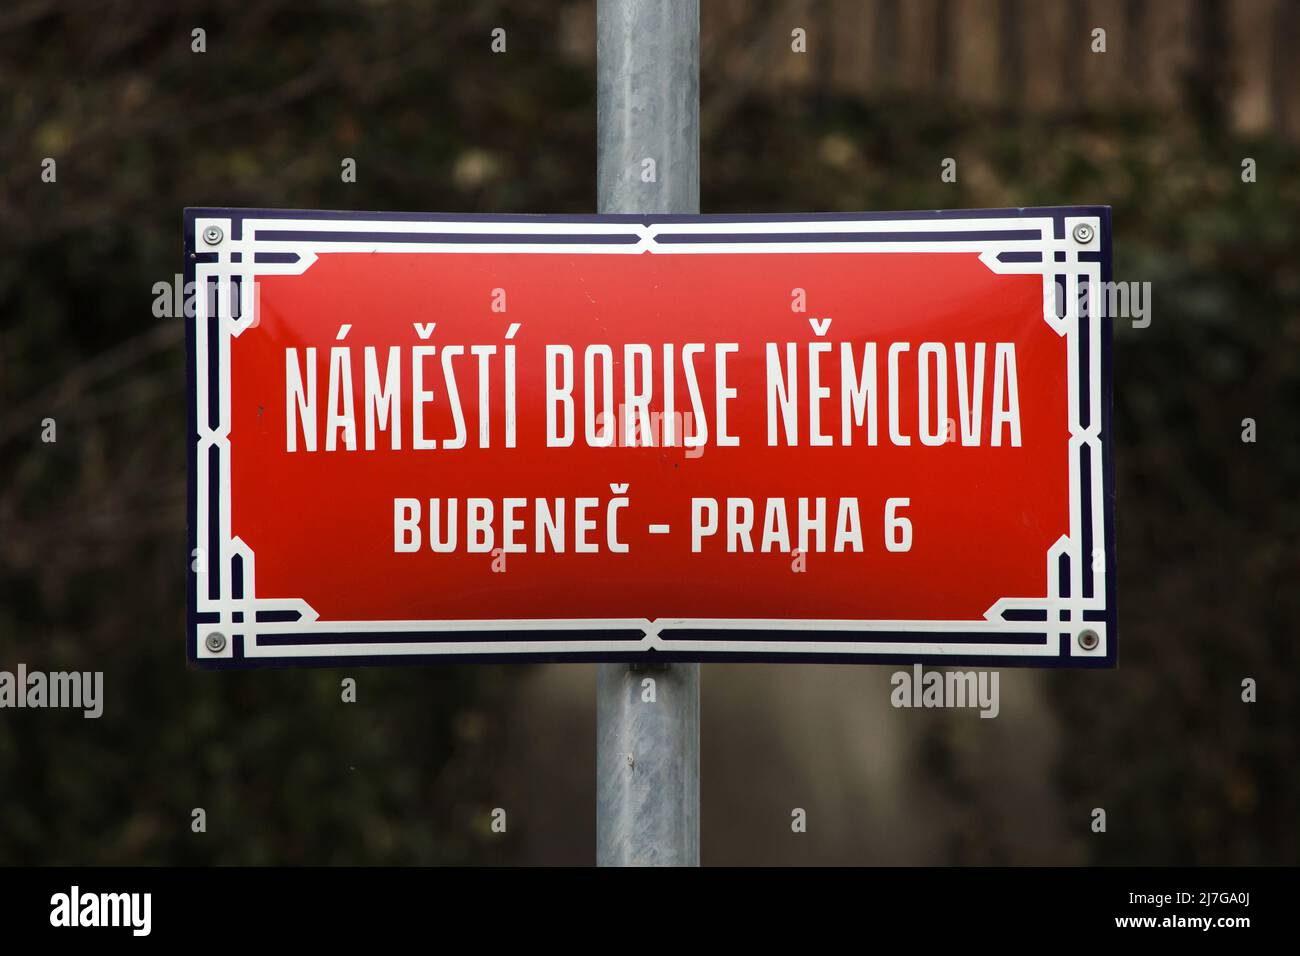 Náměstí Borise Němcova (Boris Nemtsov Square). Traditional red street sign next to the building of the Russian Embassy in Bubeneč district in Prague, Czech Republic. In February 2020, the square formerly known as Pod Kaštany Square was named after Russian liberal politician Boris Nemtsov (Boris Němcov) killed in February 2015. Stock Photo